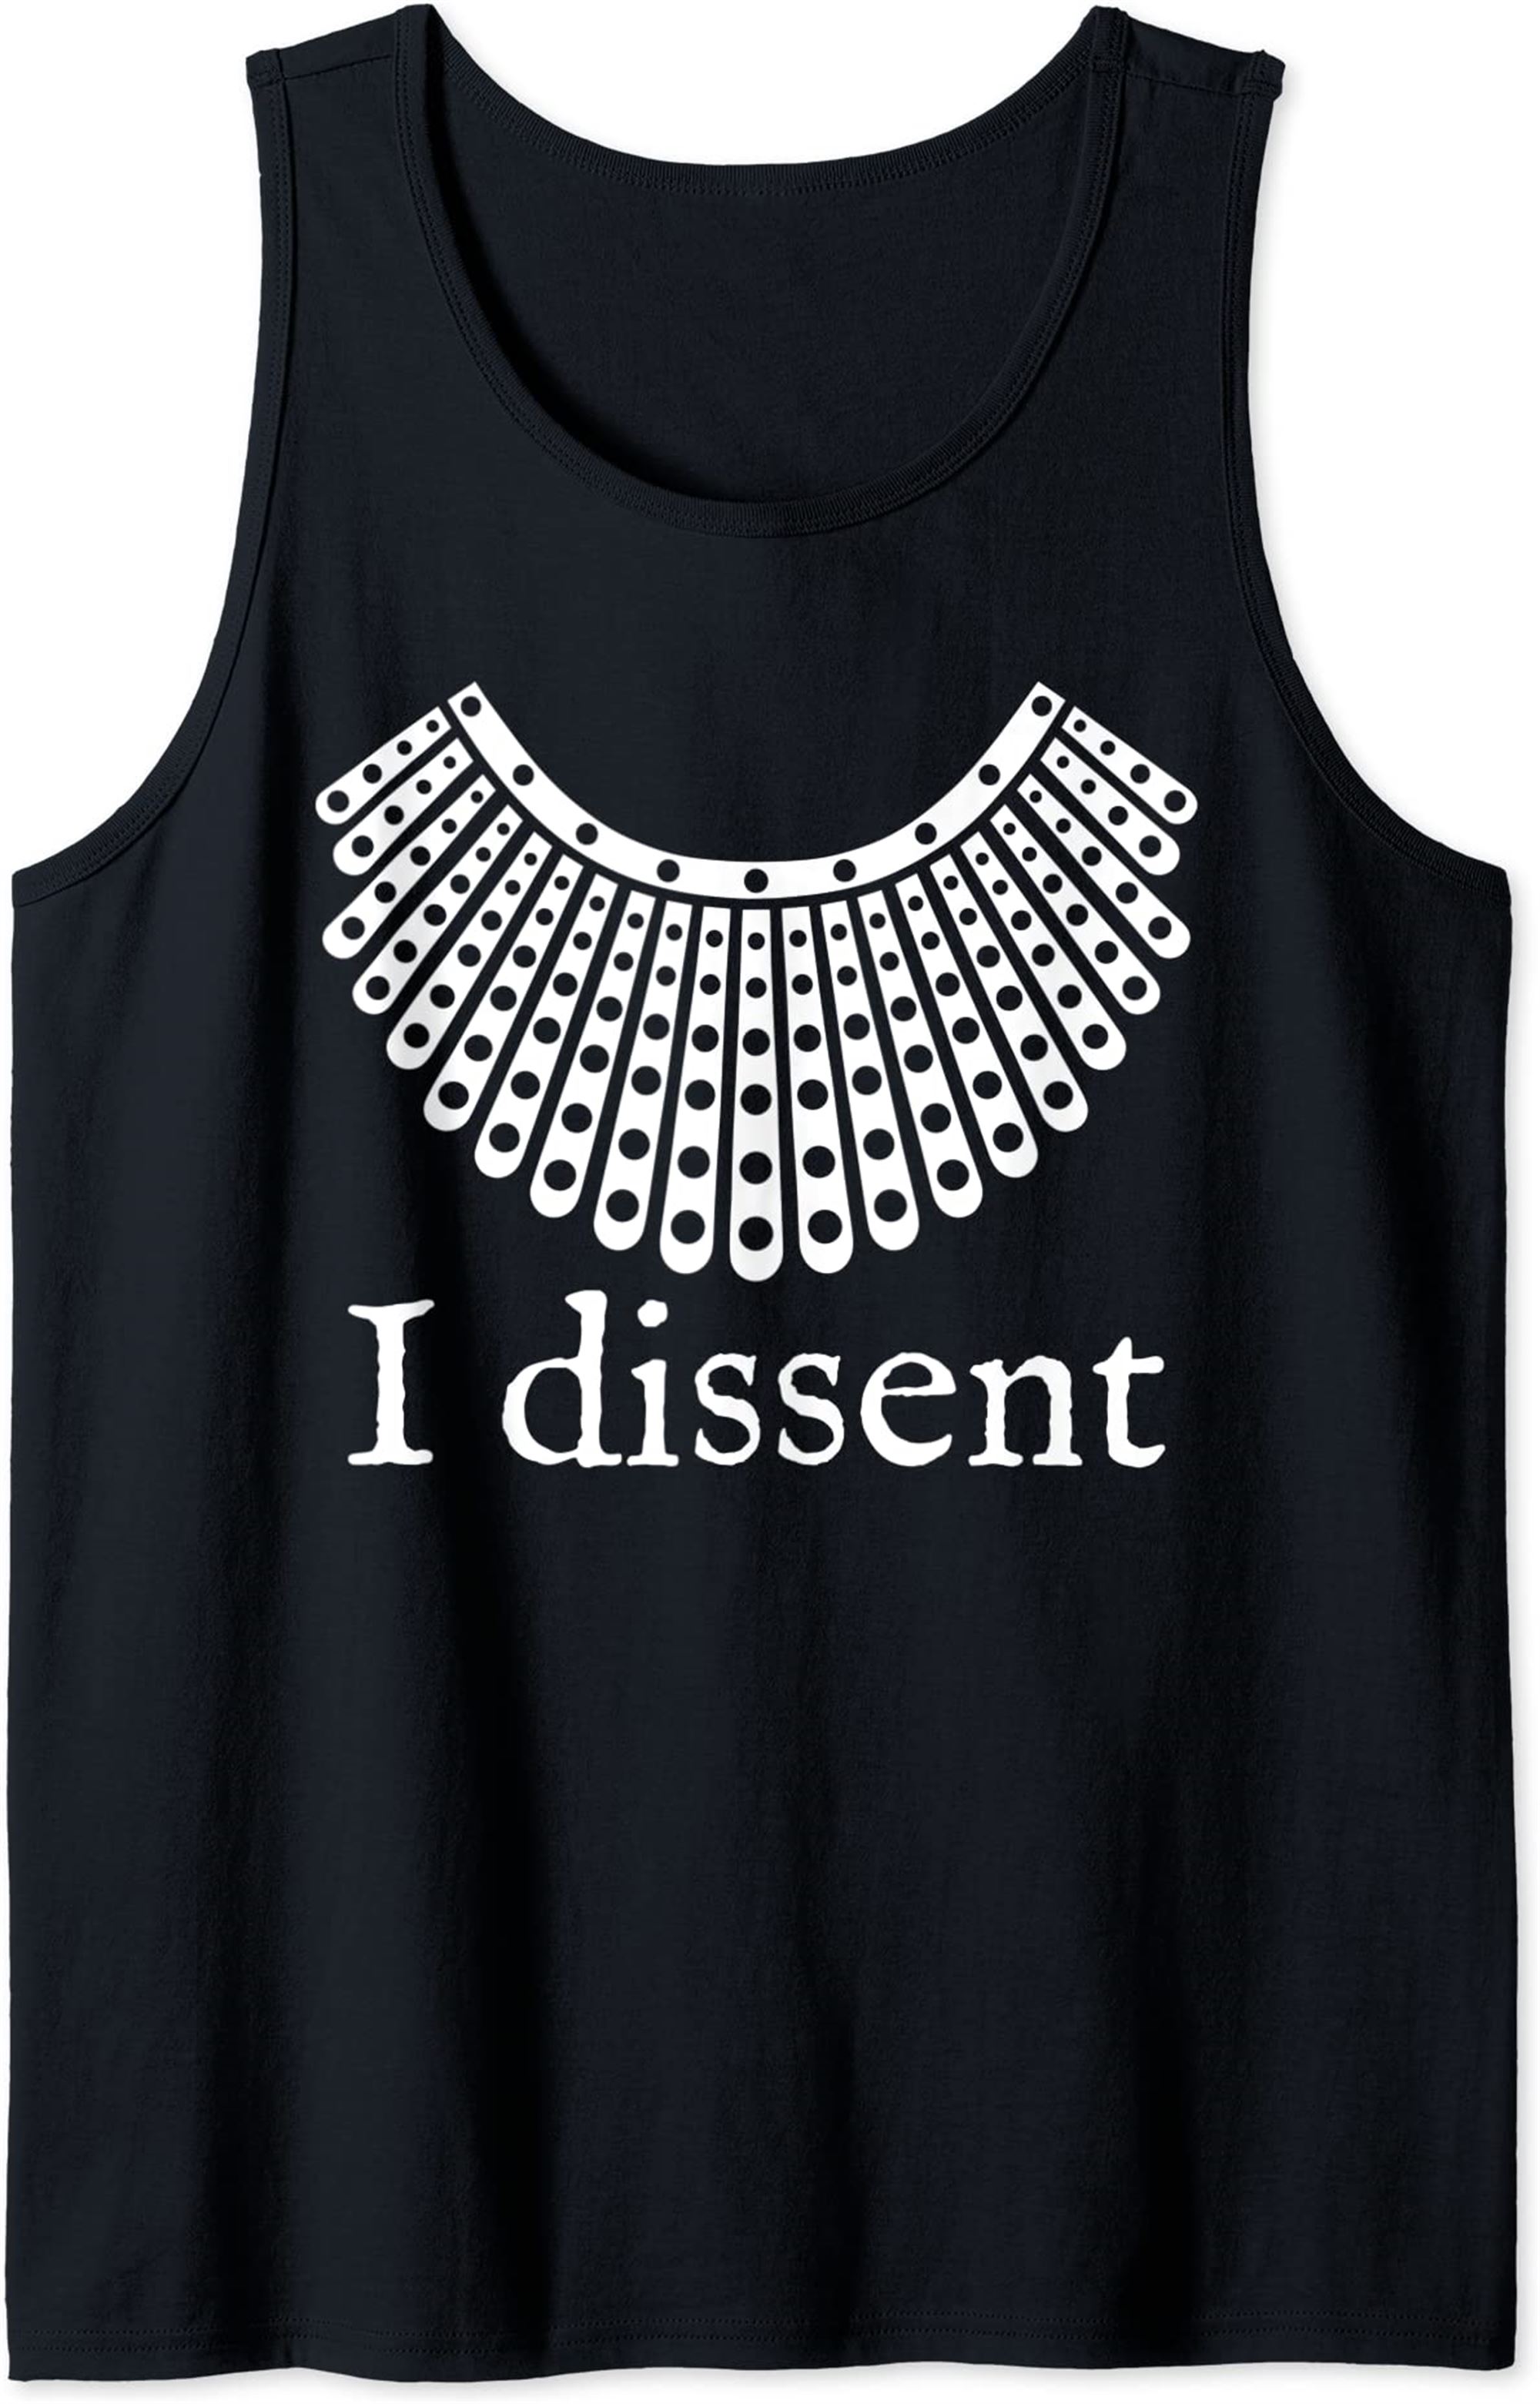 I Dissent Shirt I Dissent Collar Rbg For Women I Dissent Tank Top Plus Size Up To 5xl